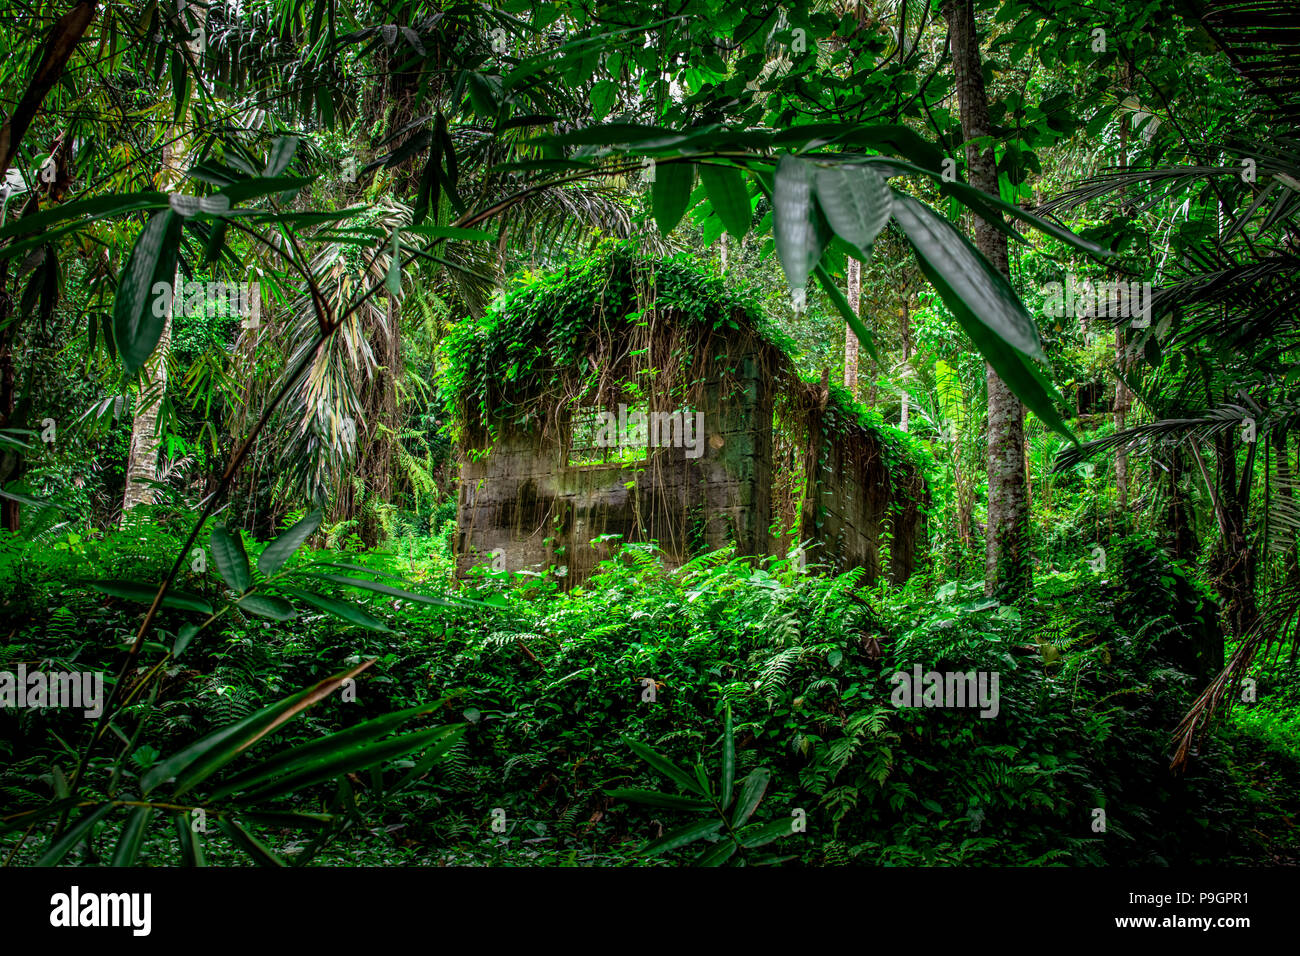 Fabulous thrown house in a tropical forest, Bali lifstyle Stock Photo